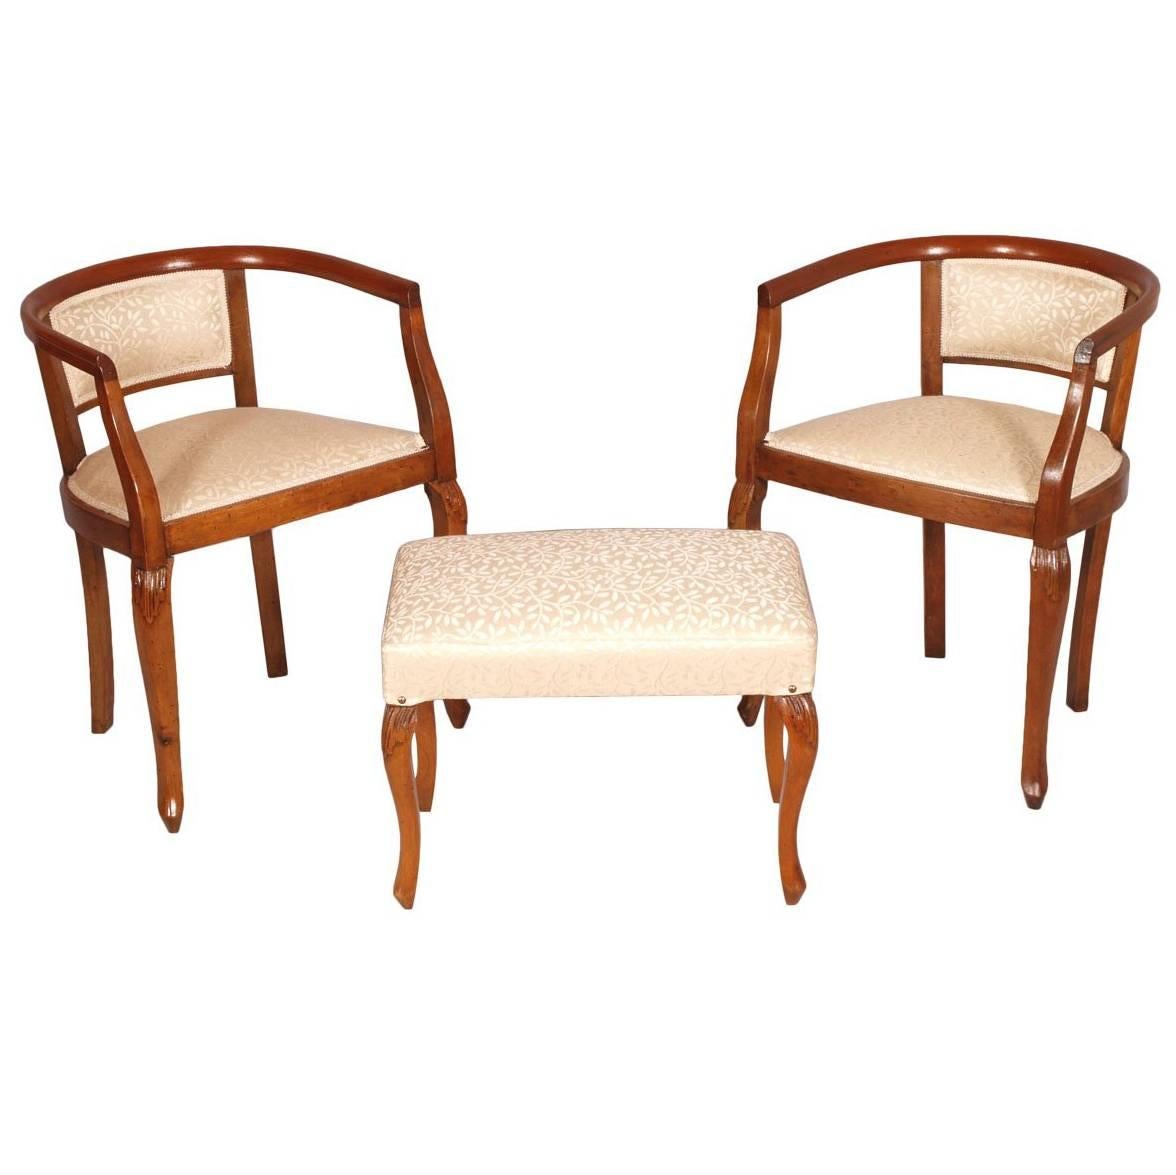 Early 20th Century Italian Set Bedroom Chairs Art Nouveau, Walnut Hand-Cared For Sale